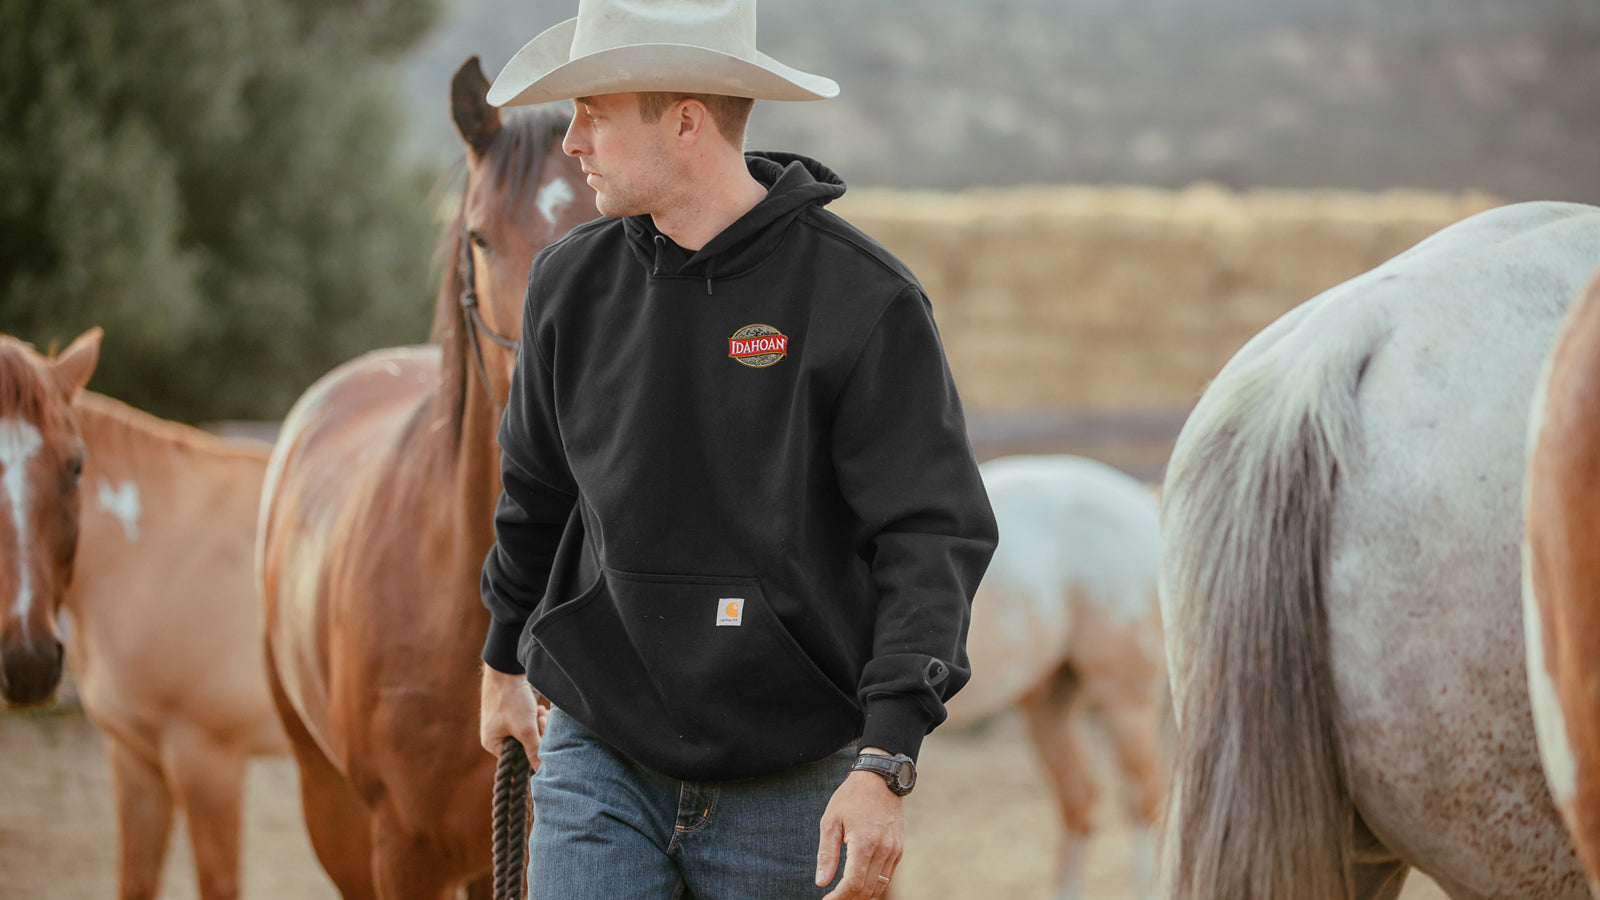 Our Best Selling Carhartt Apparel